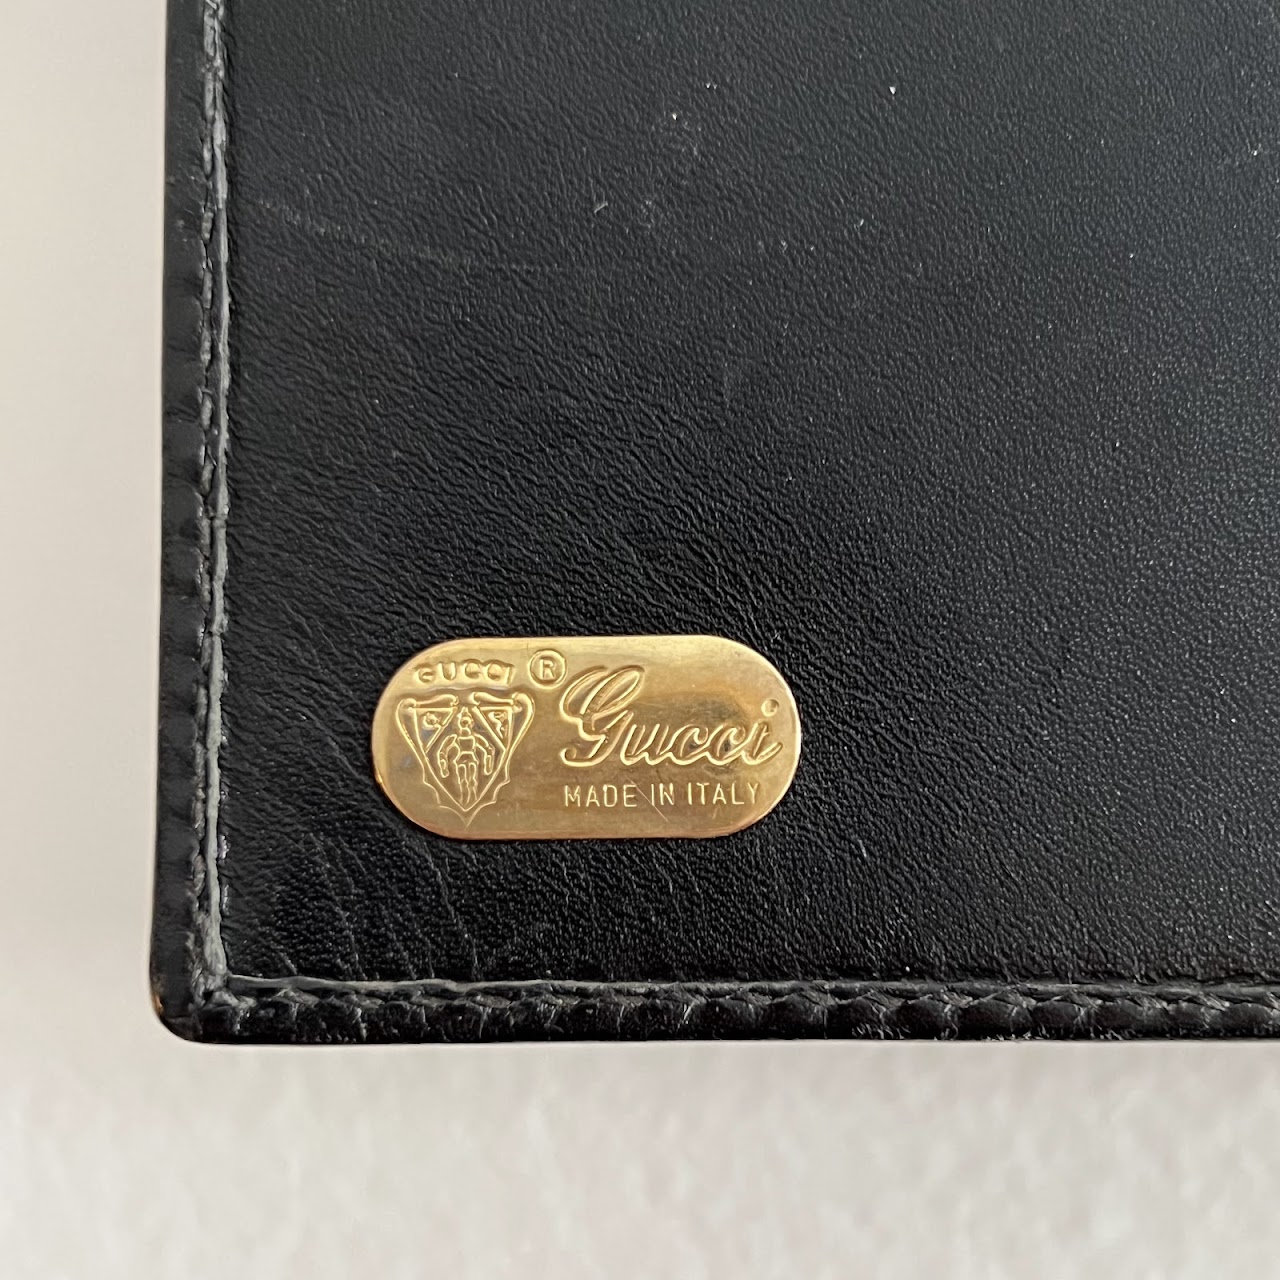 Gucci Vintage Leather Five-Ring Notebook Case